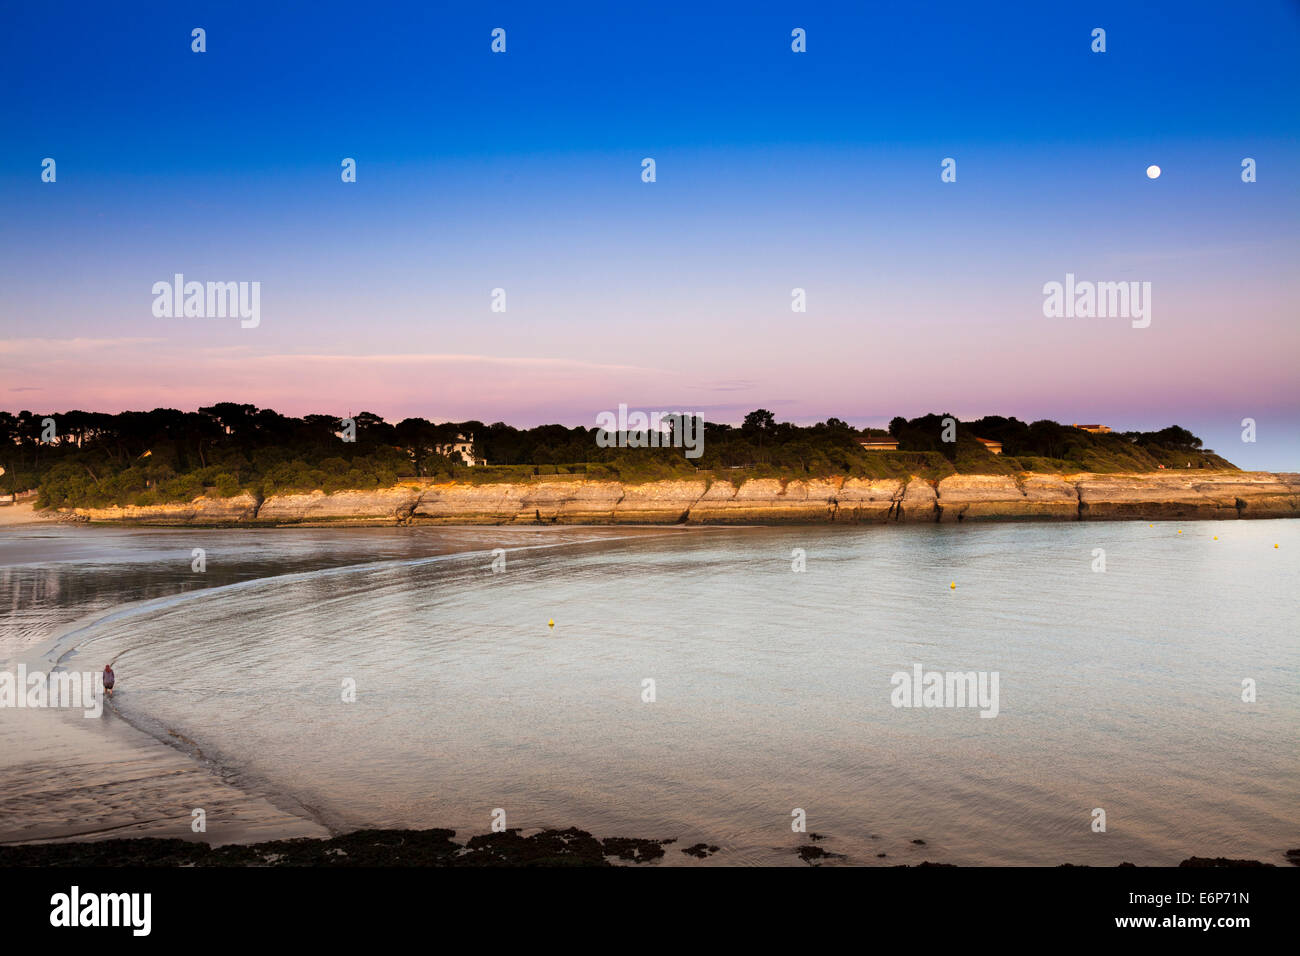 A solitary person walks along the waters edge as the full moon rises at dusk. Stock Photo